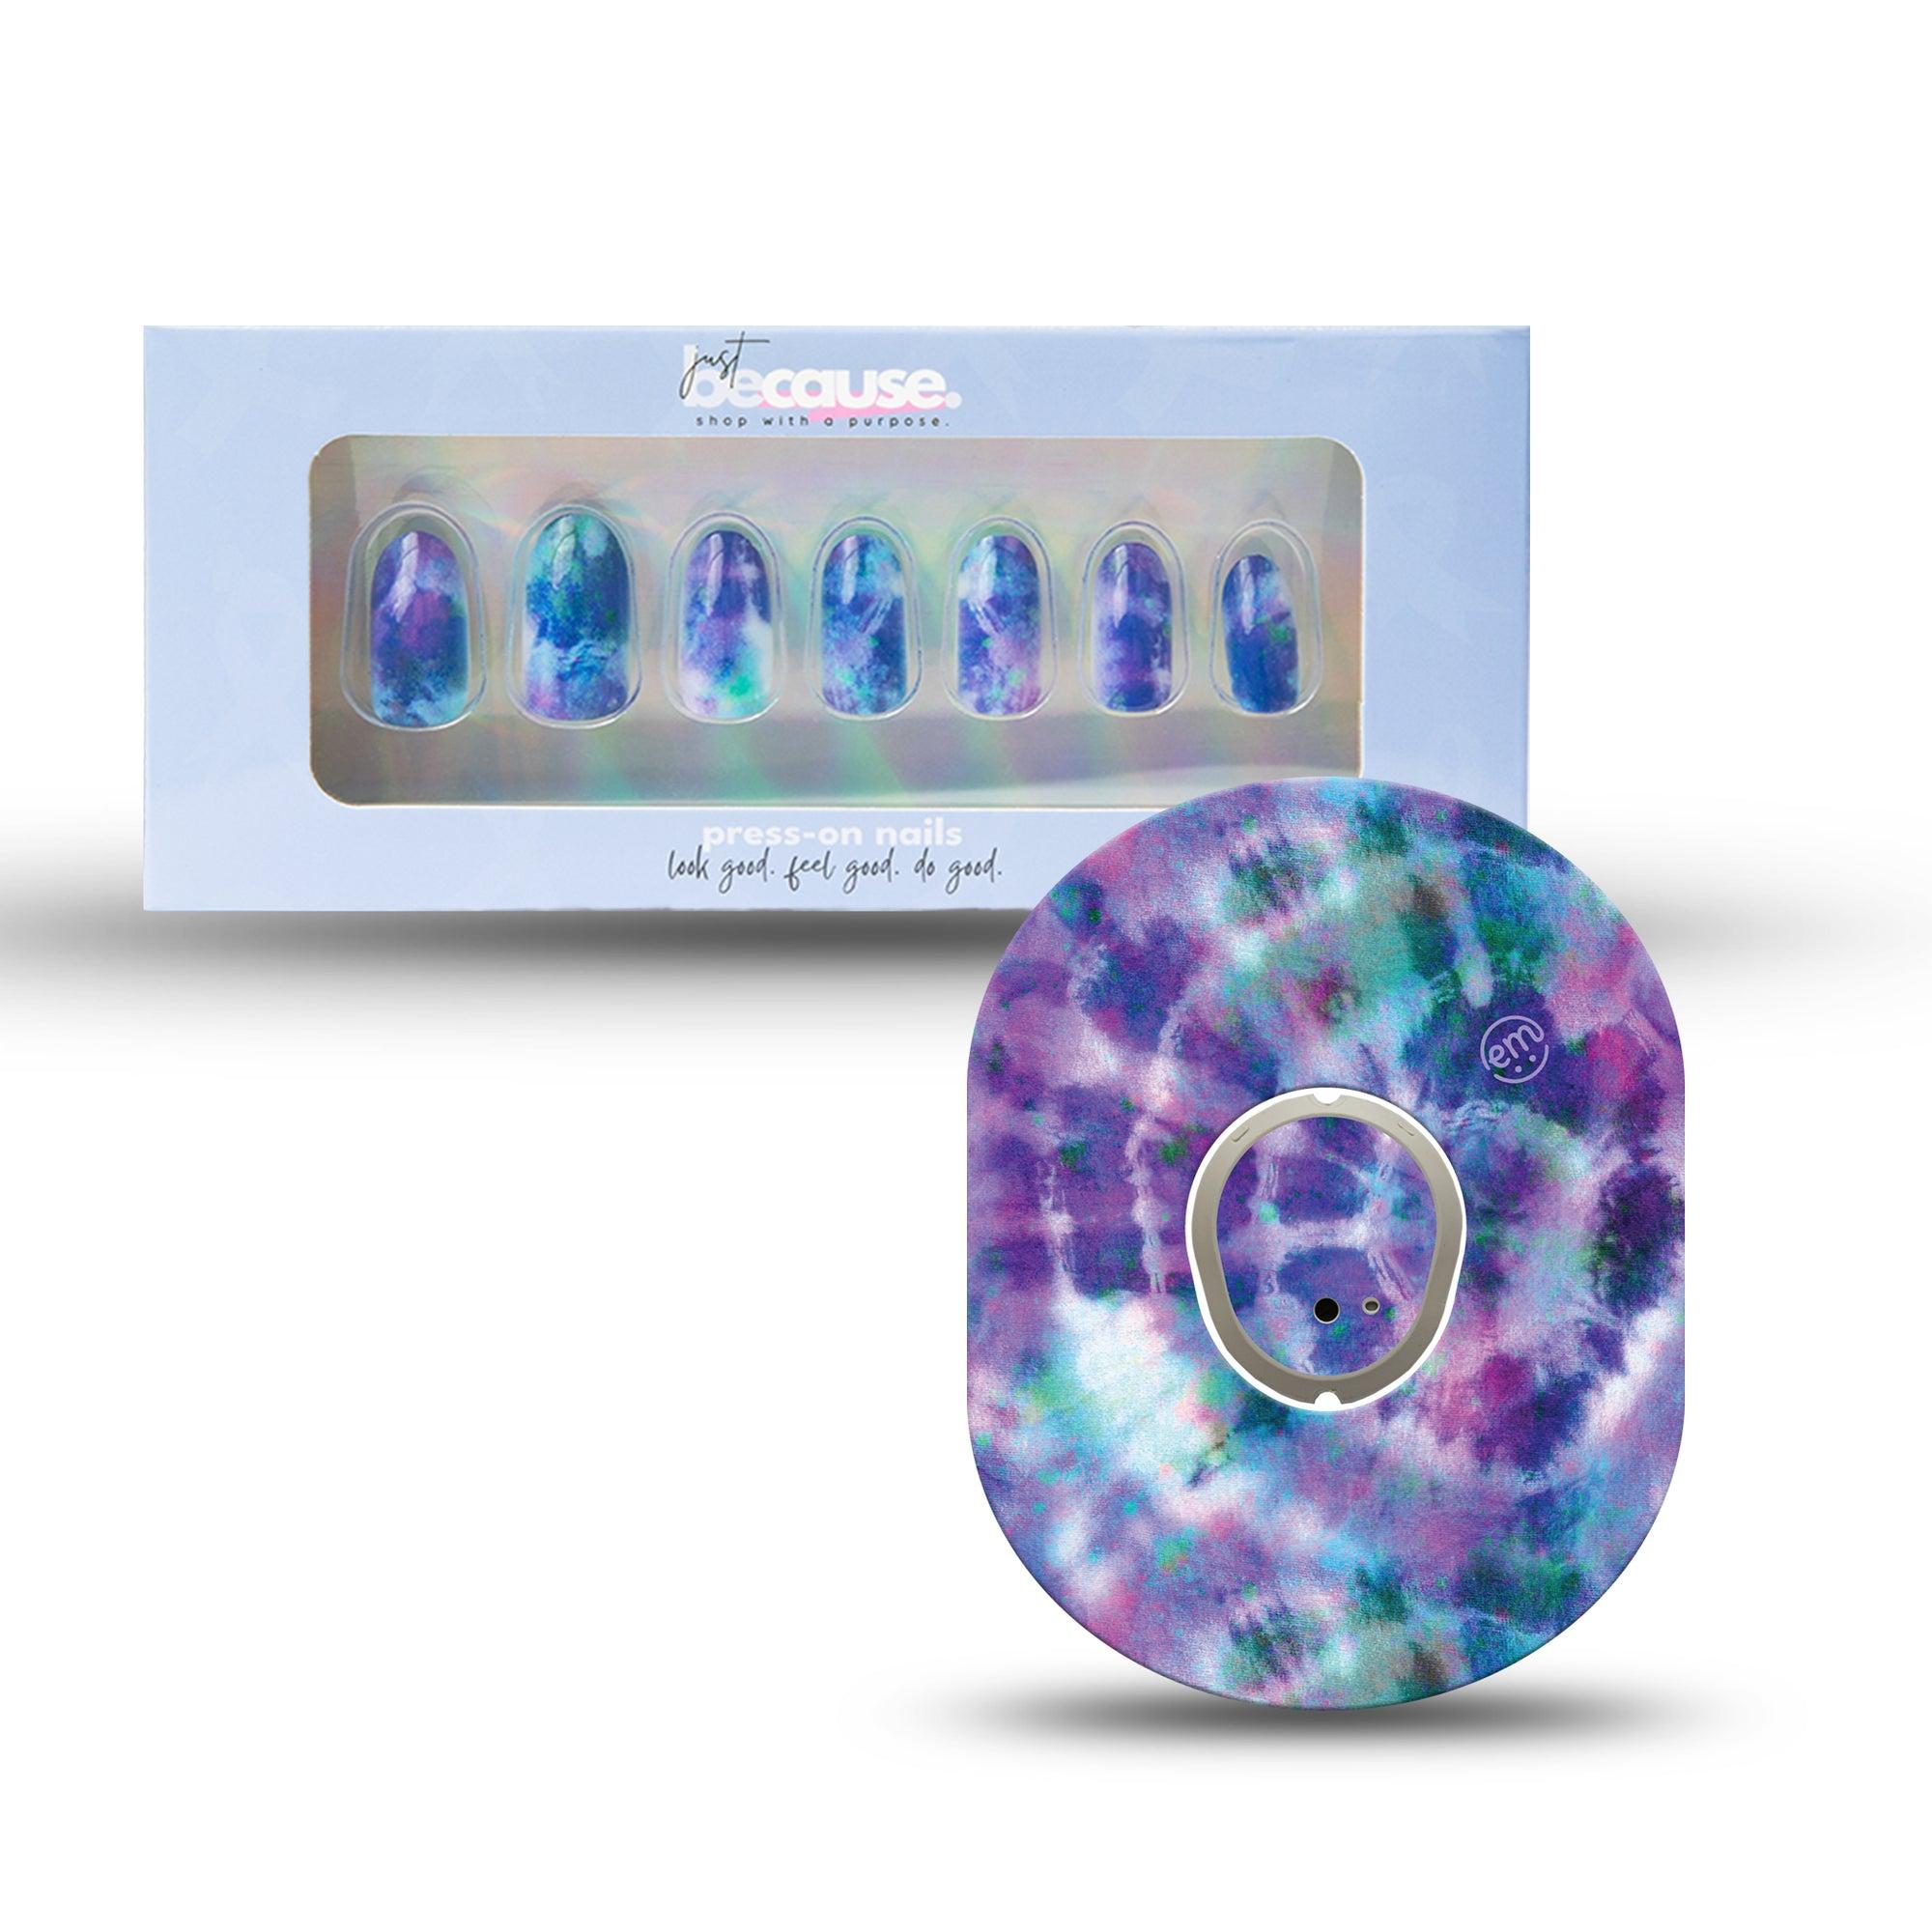 ExpressionMed Just BeCause 24 Pcs ABS Press on nails Medium, Purple and Blue Tie Dye Fake Nails set with matching Purple Tie Dye Dexcom G7 Fixing Ring and Center Sticker,Support T1D - ExpressionMed.com	